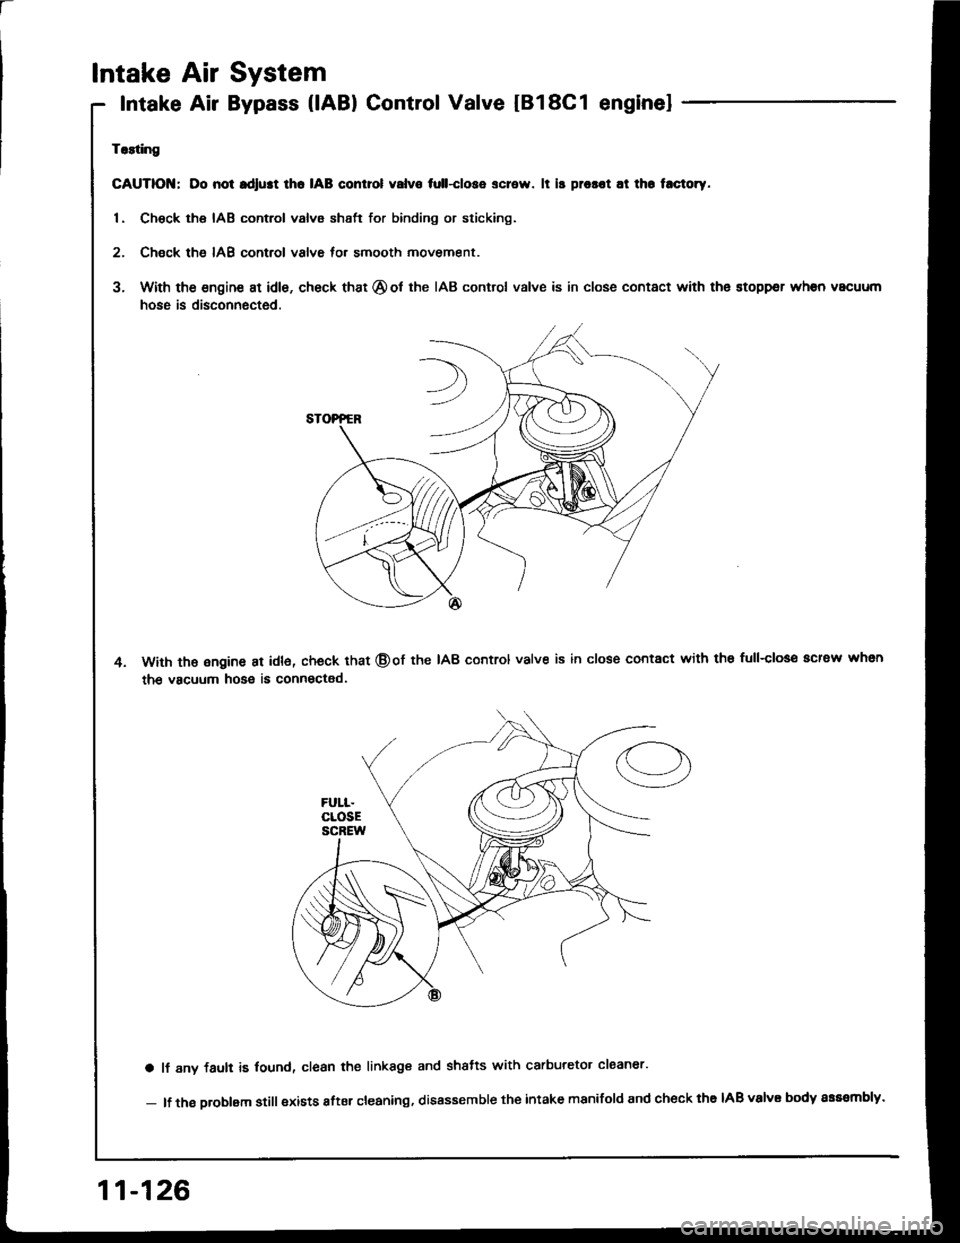 HONDA INTEGRA 1994 4.G Owners Manual a
Intake Air System
Intake Air Bypass (lABl Control Valve IB18C1 enginel
Trlting
GAUTIOI{; Do not rdlust lho IAB control valvo tull-close screw. lt is prosot at th. t.ctoty.
1. Chsck the IAB control v